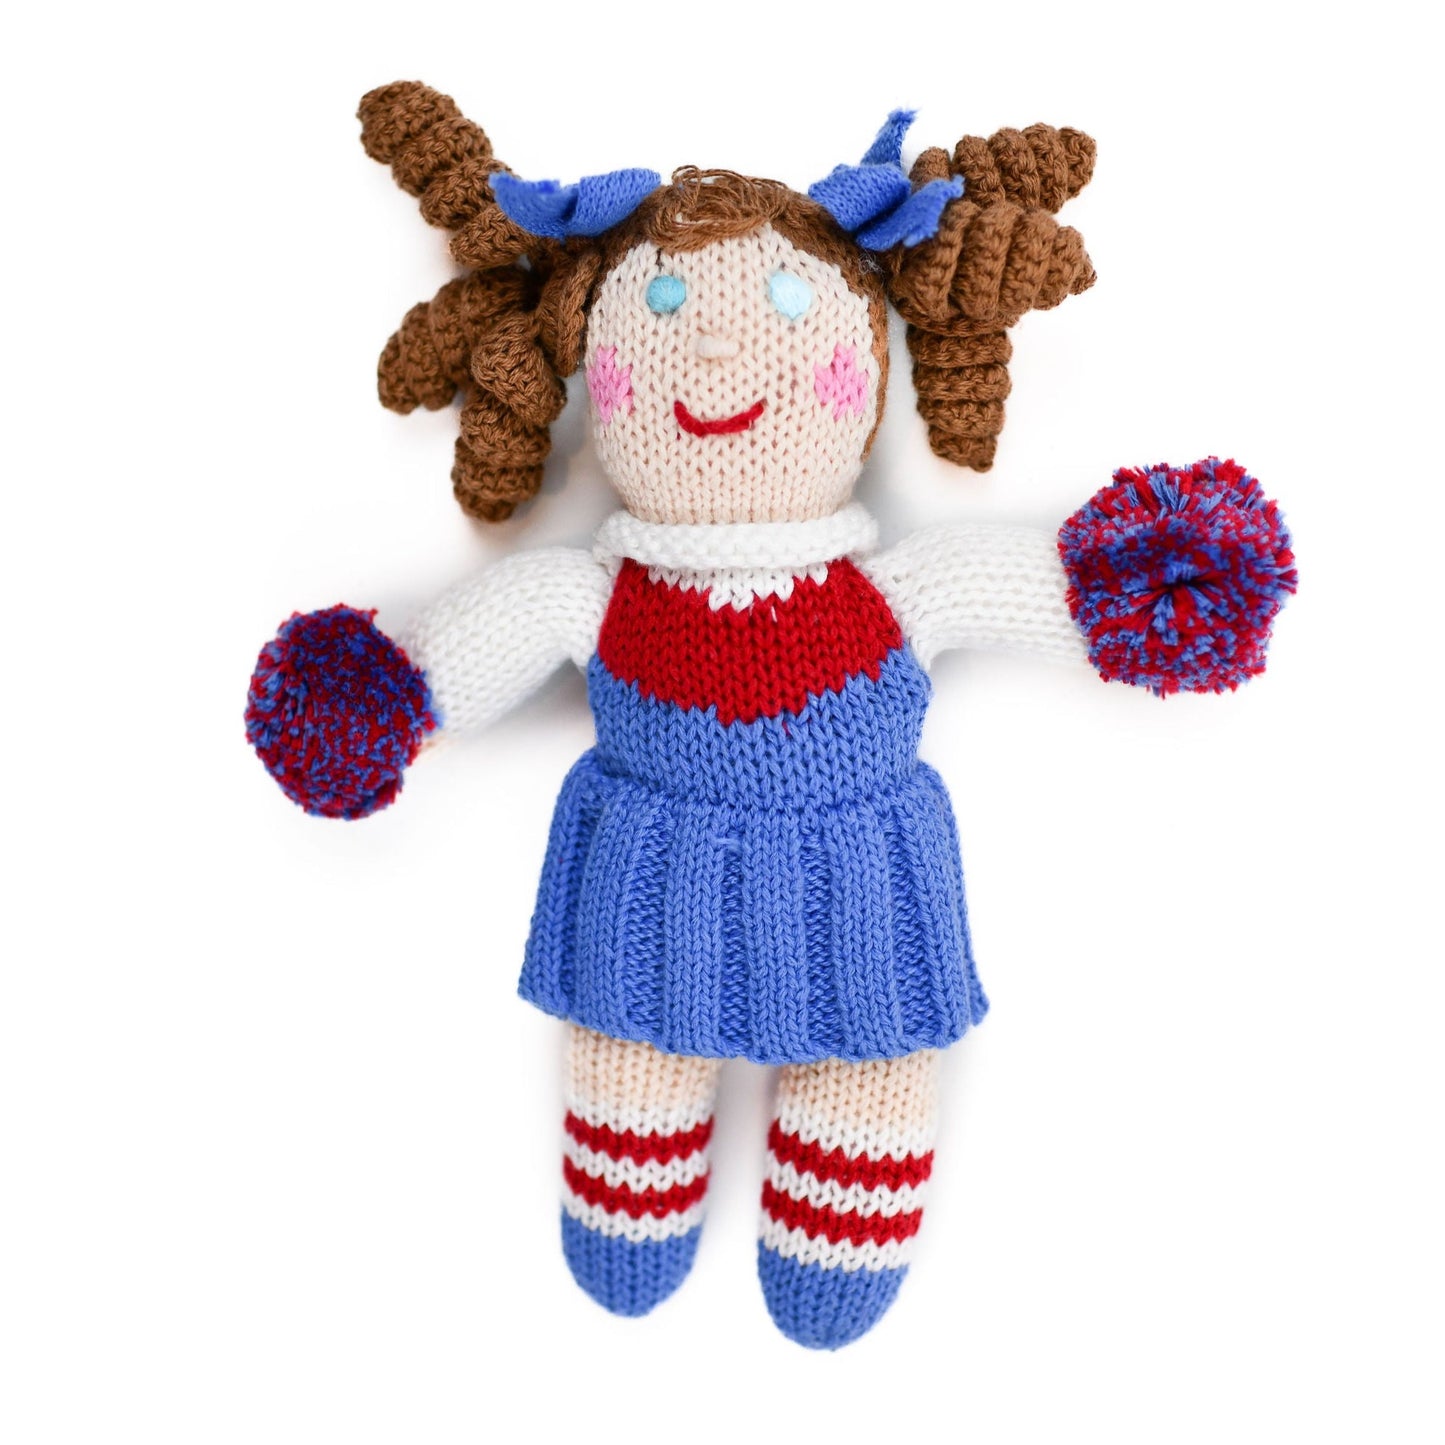 7 inches tall Cheerleader Knit Rattle by Zubels